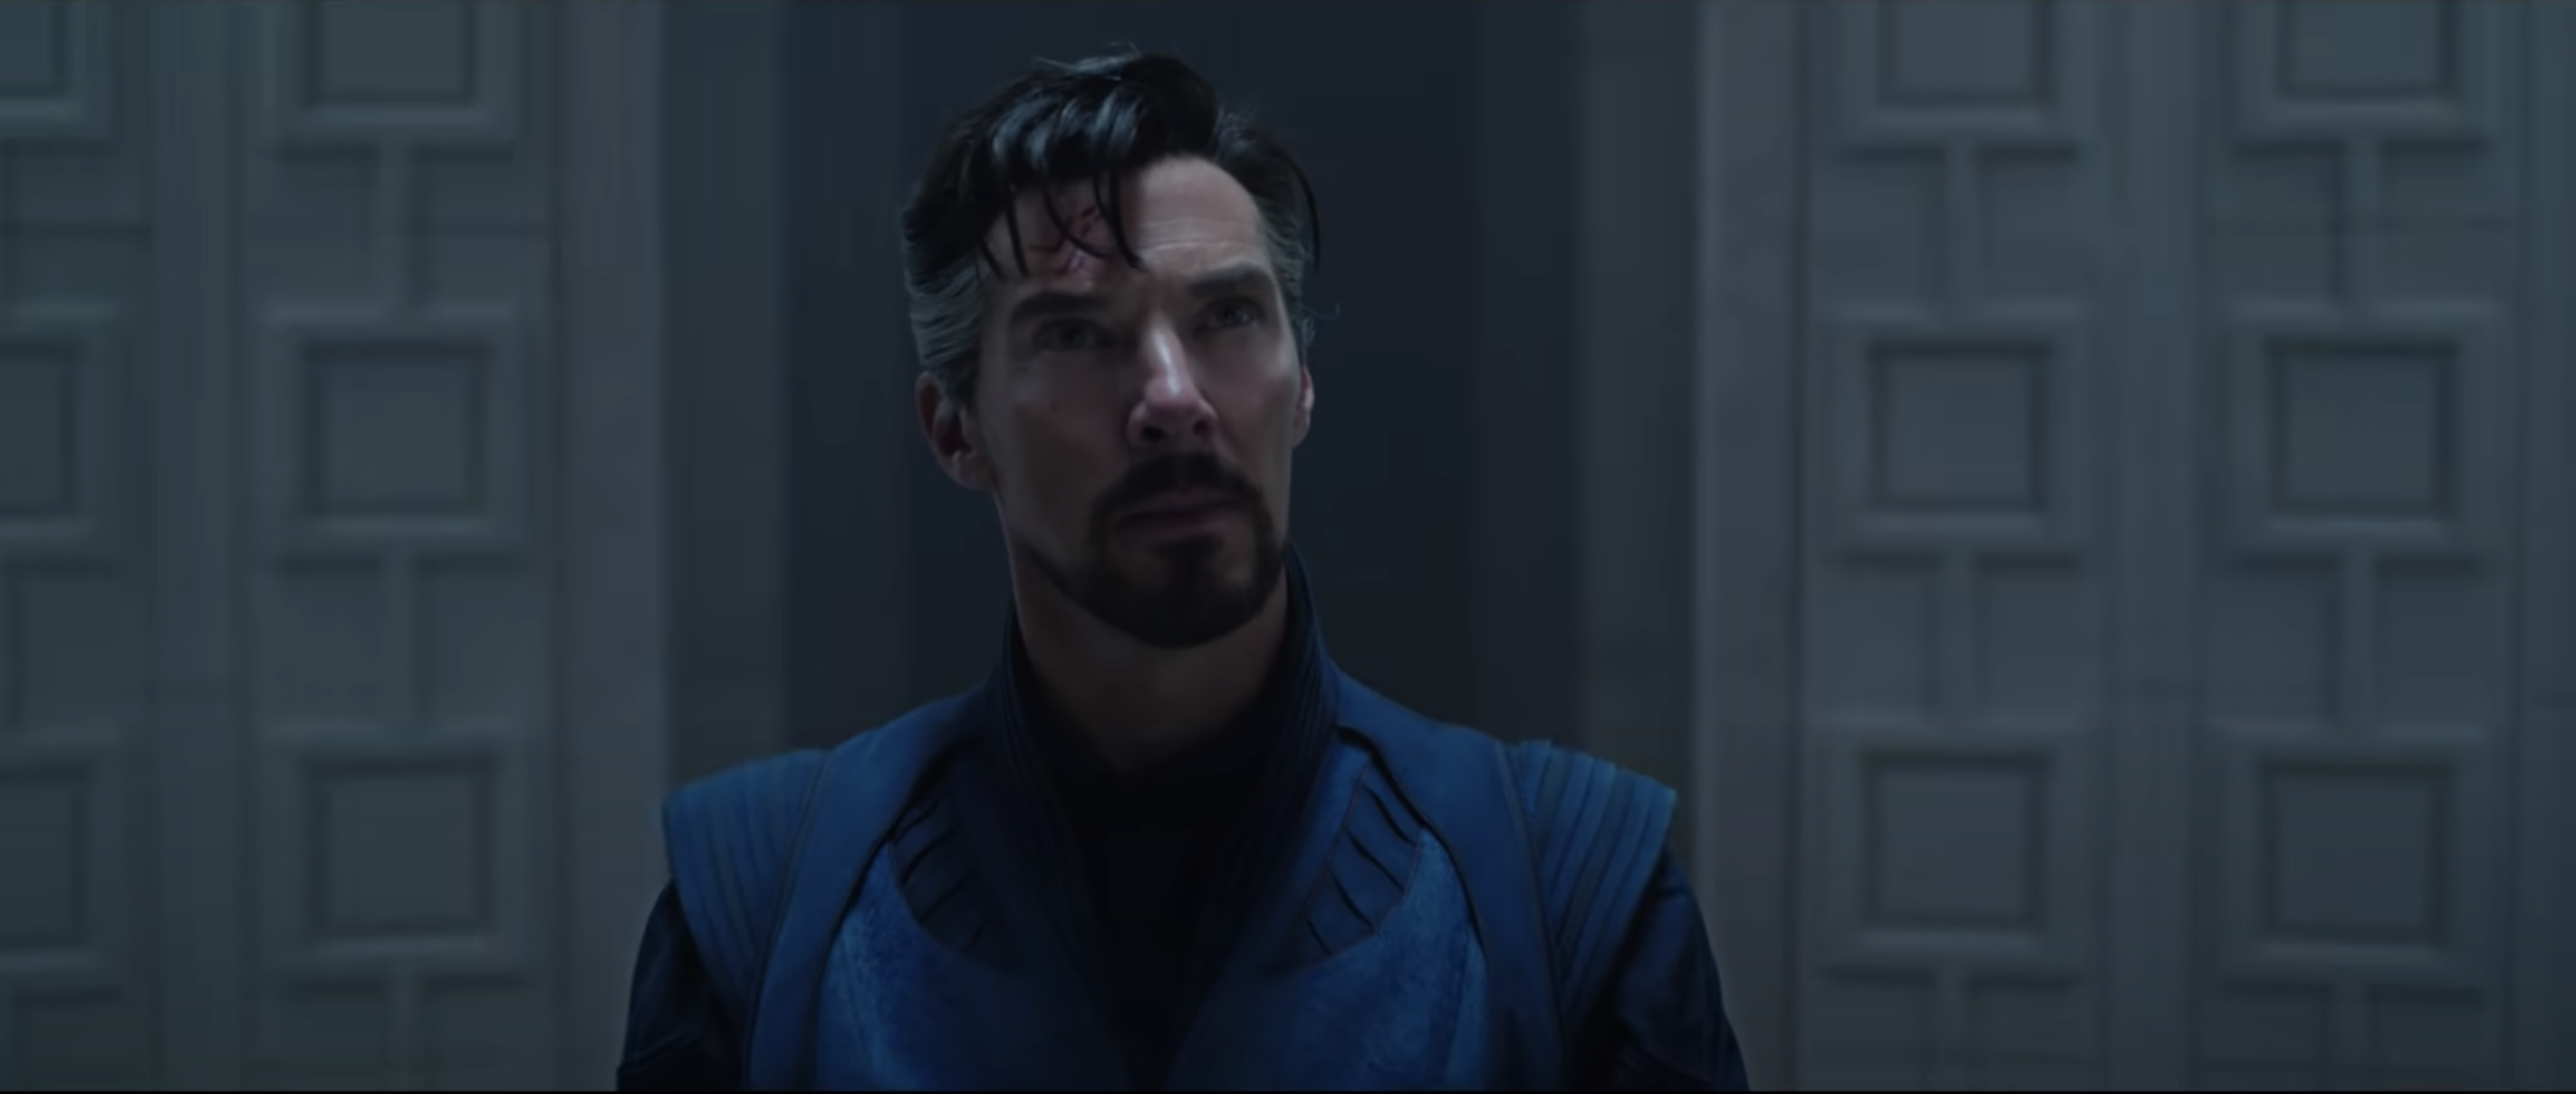 Benedict Cumberbatch in the <i>Doctor Strange in the Multiverse of Madness</i> trailer (Marvel Studios)